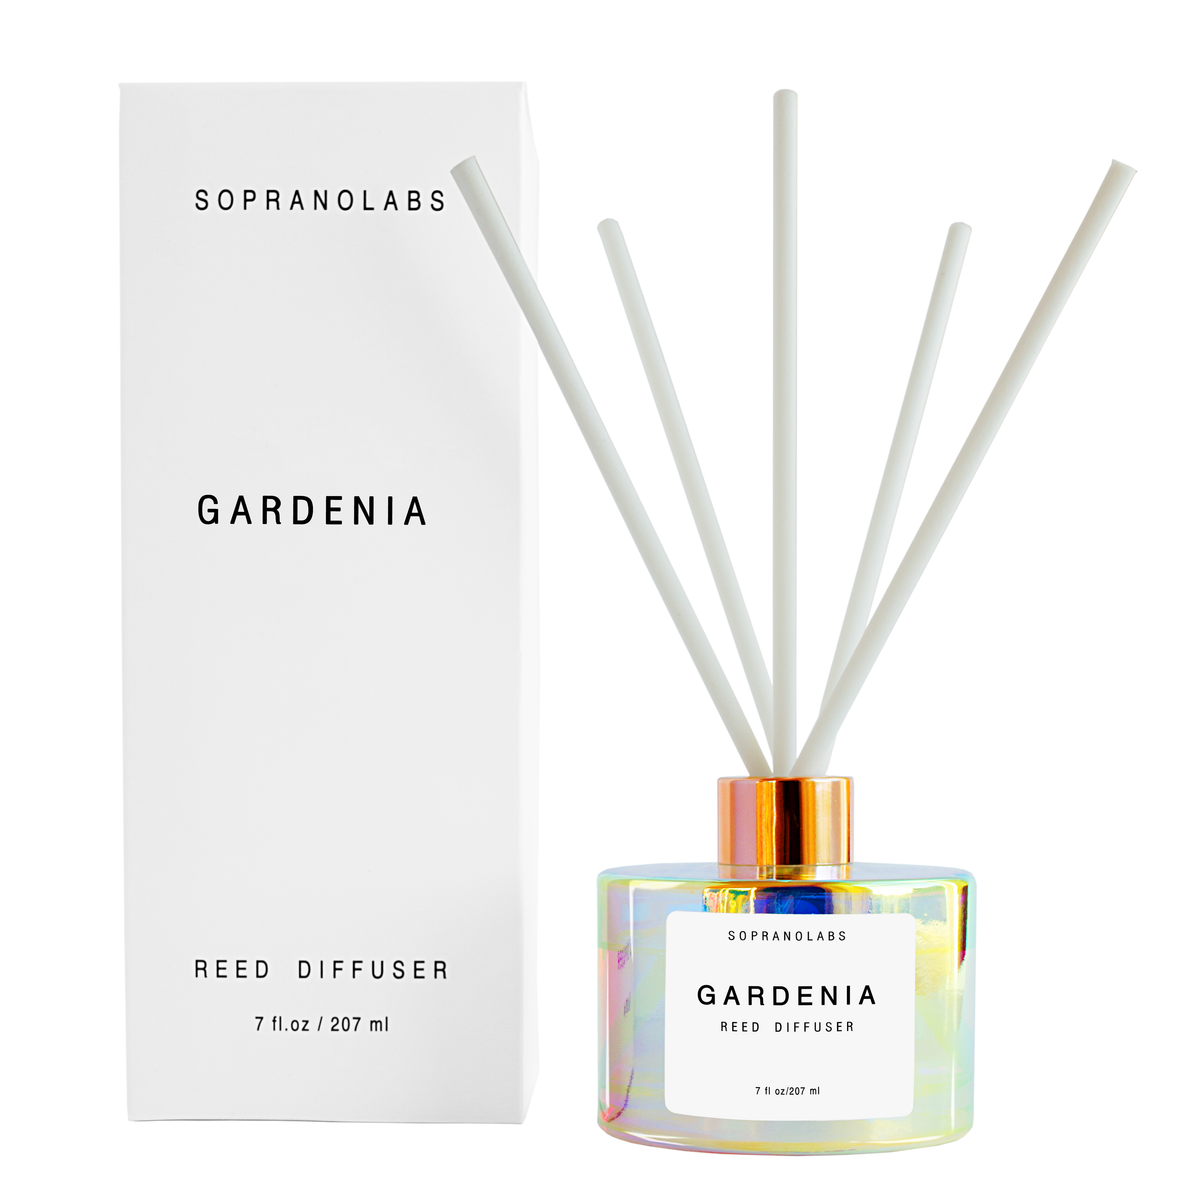 GARDENIA Reed Diffuser. Luxury Home Scent.7 fl oz. Gift. SPA: Black reeds